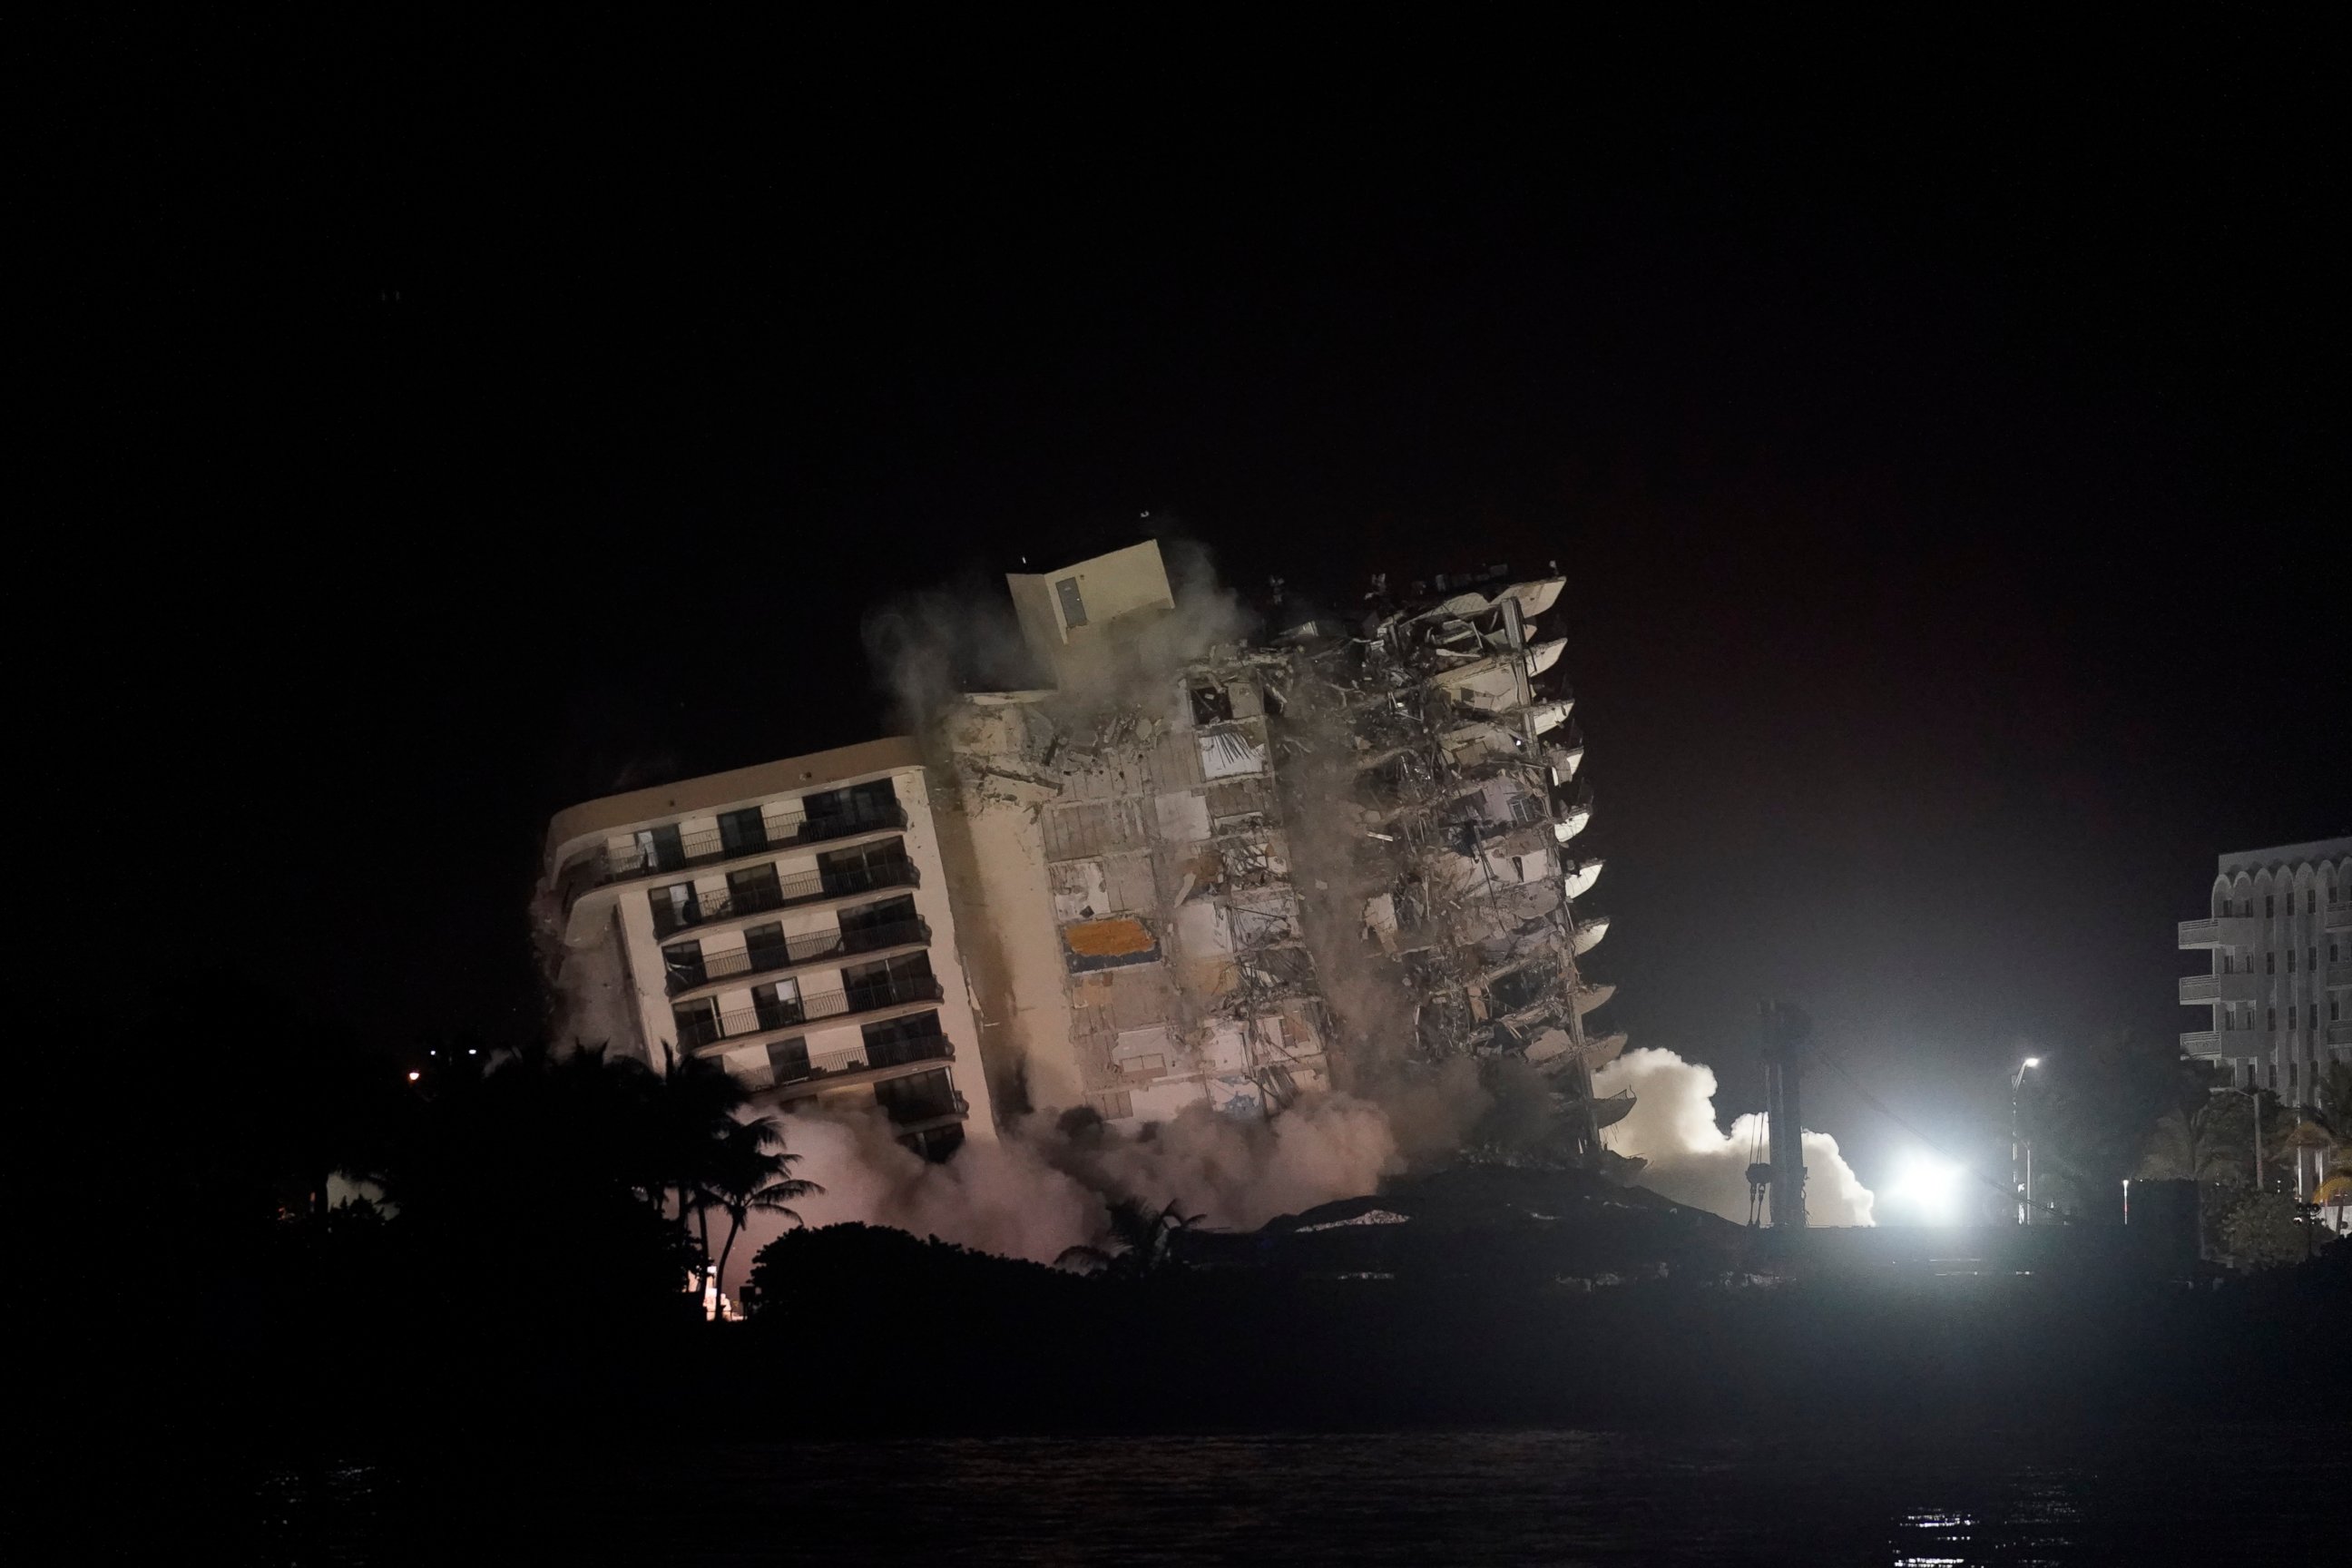 The damaged remaining structure at the Champlain Towers South condo building collapses in a controlled demolition, Sunday, July 4, 2021, in Surfside, Fla. The decision to demolish the Surfside building came after concerns mounted that the damaged str